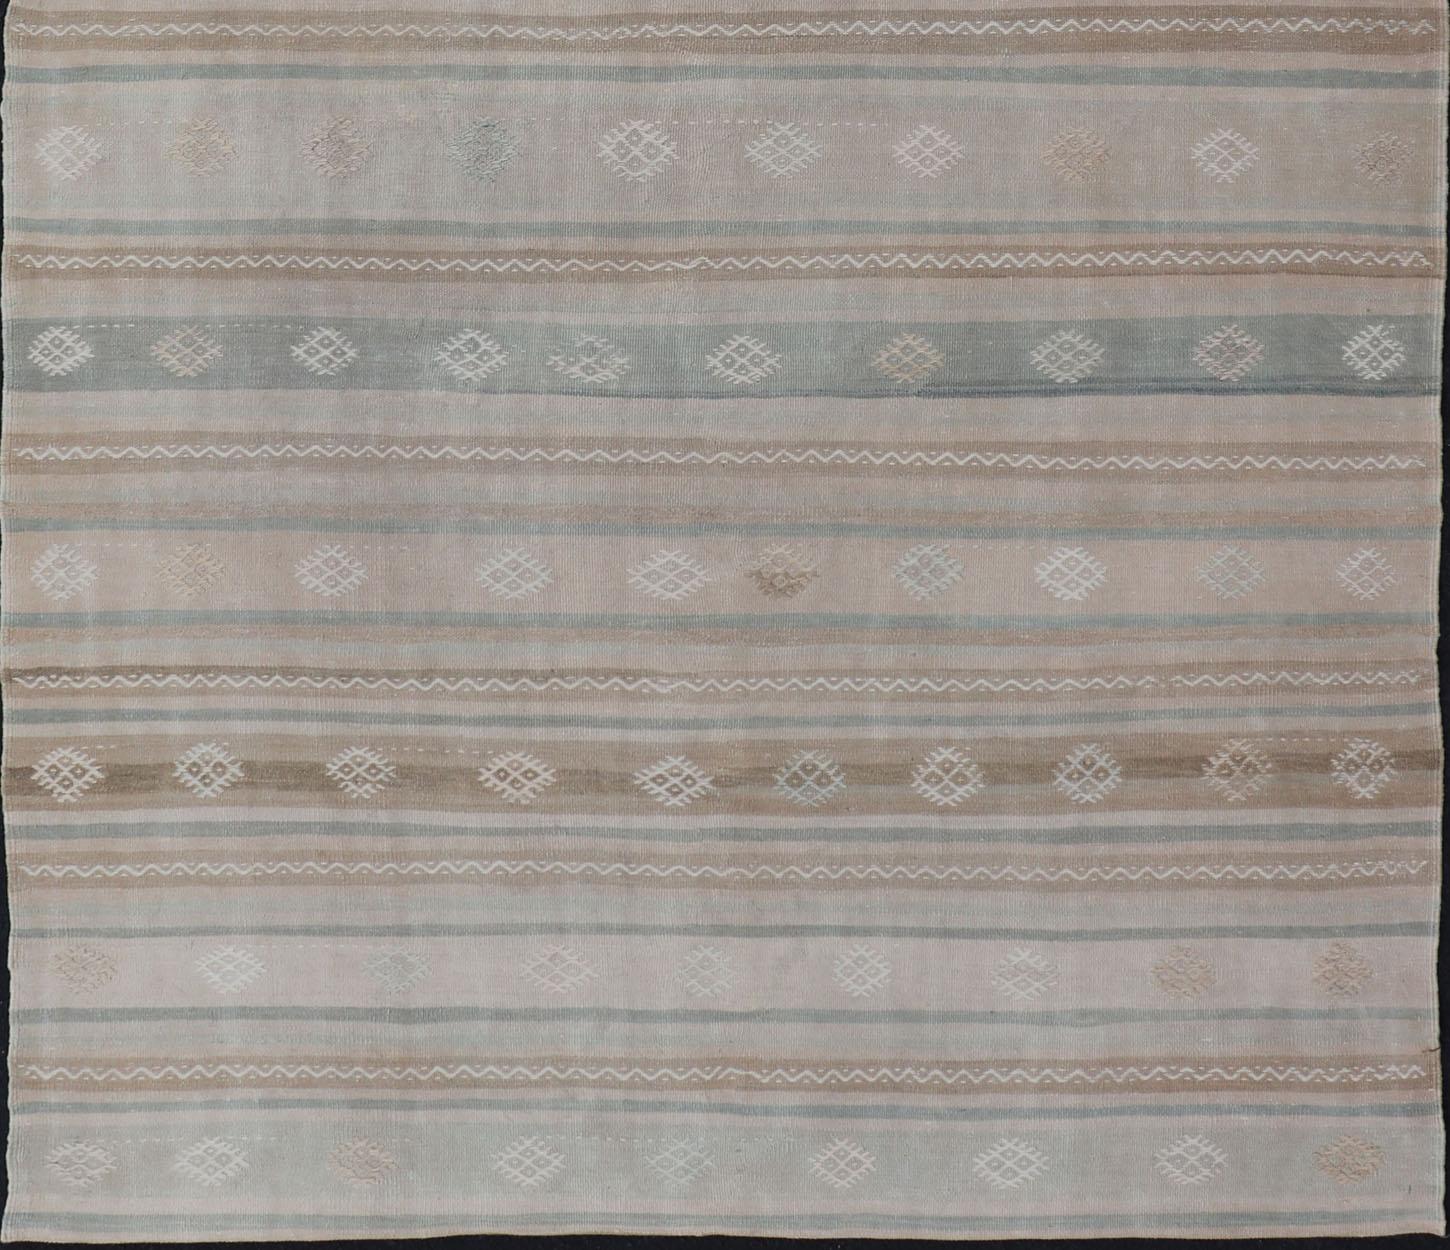 Turkish Vintage Kilim Rug with in Tan, Taupe, Brown, Gray Blue, and Earth Tones In Good Condition For Sale In Atlanta, GA